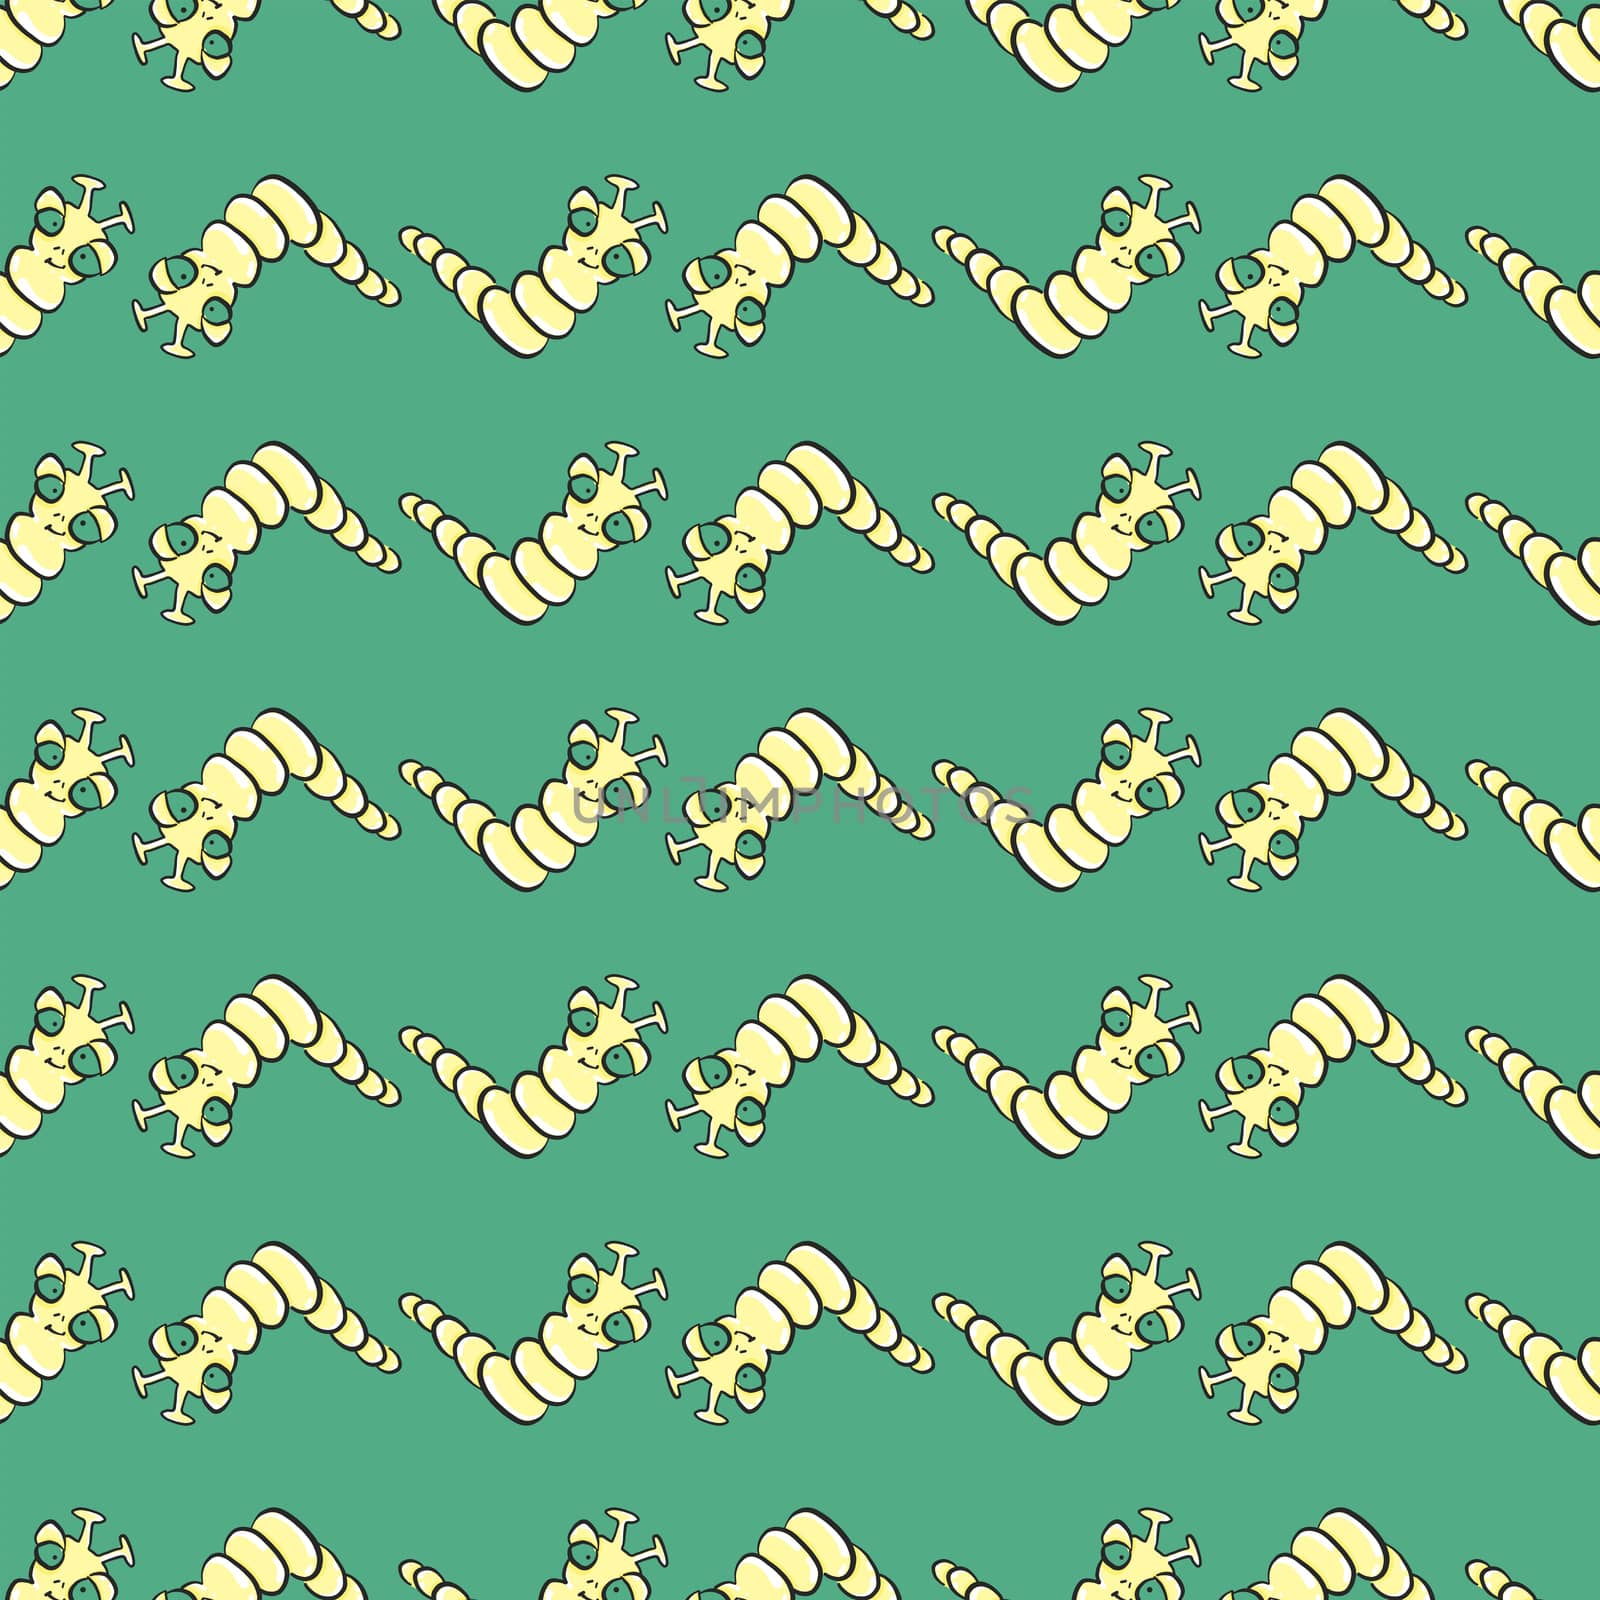 Worms pattern , illustration, vector on white background by Morphart